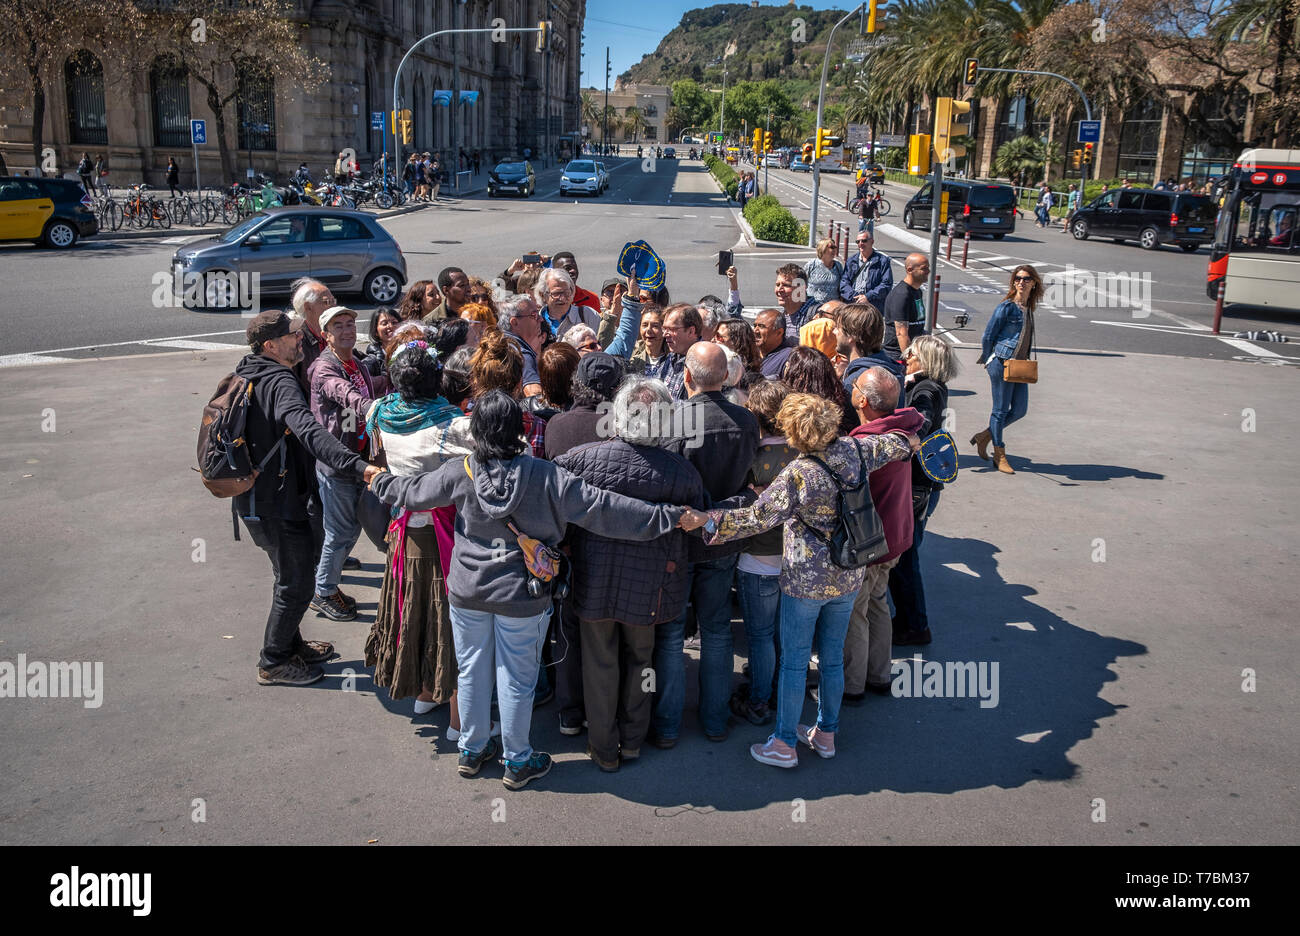 A group of protesters are seen hugging as a symbolic act during the demonstration against racism and fascism. More than 200 social groups gathered for a 'hug of the people' as part of a protest against political opposition to immigration and refugees. The rally was held in Barcelona at the foot of the Columbus monument. Stock Photo